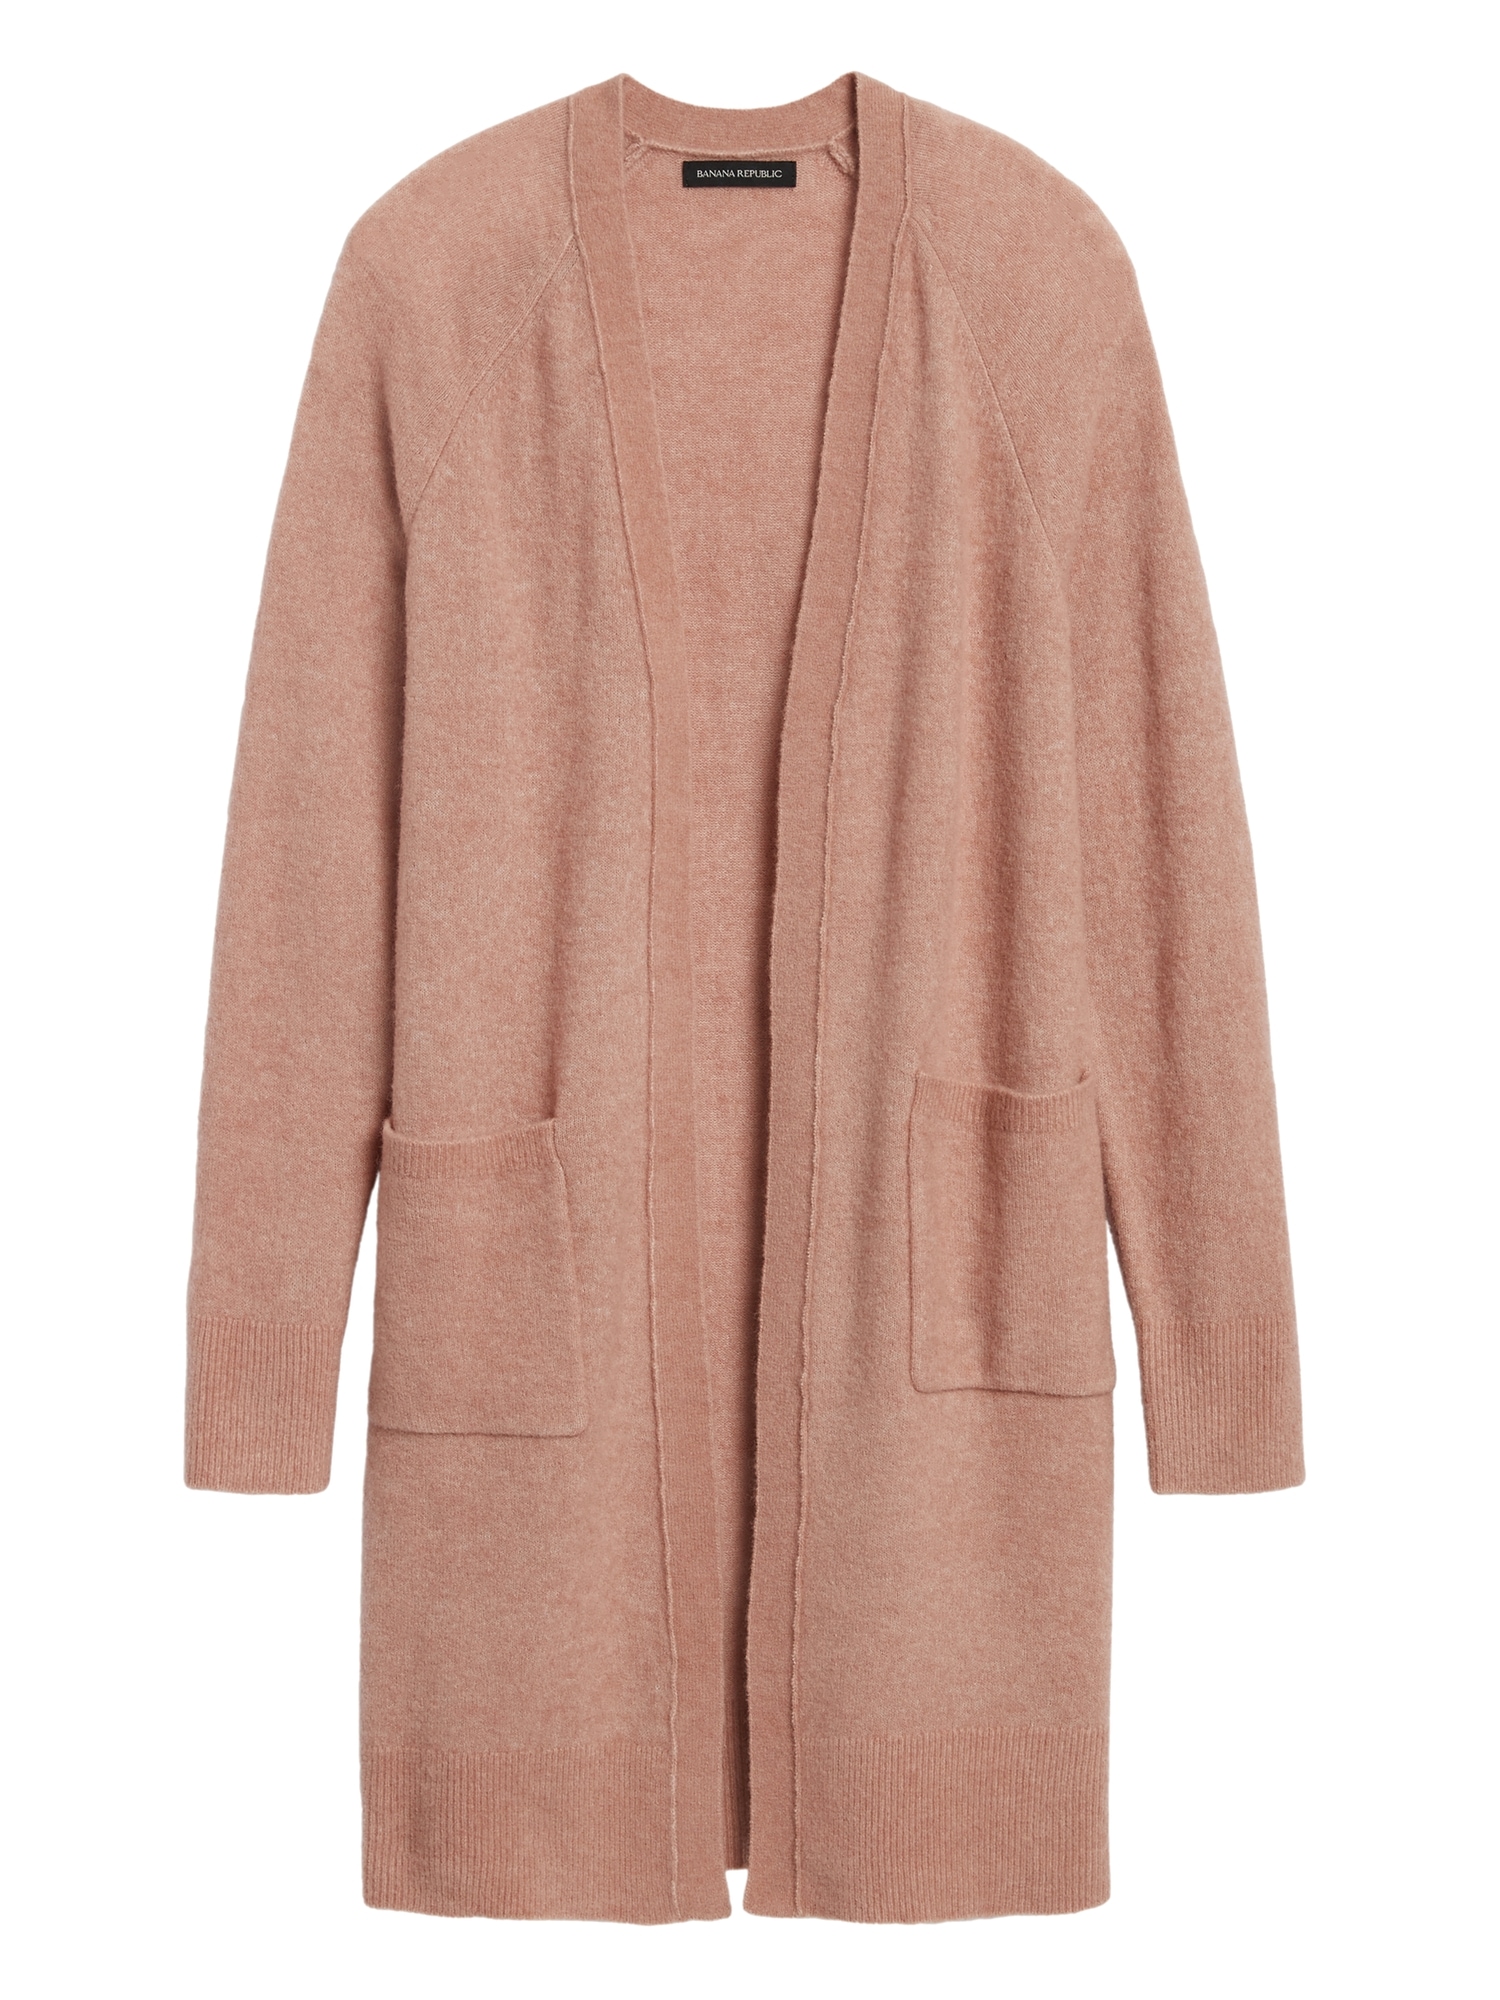 Petite Aire Duster Cardigan Sweater